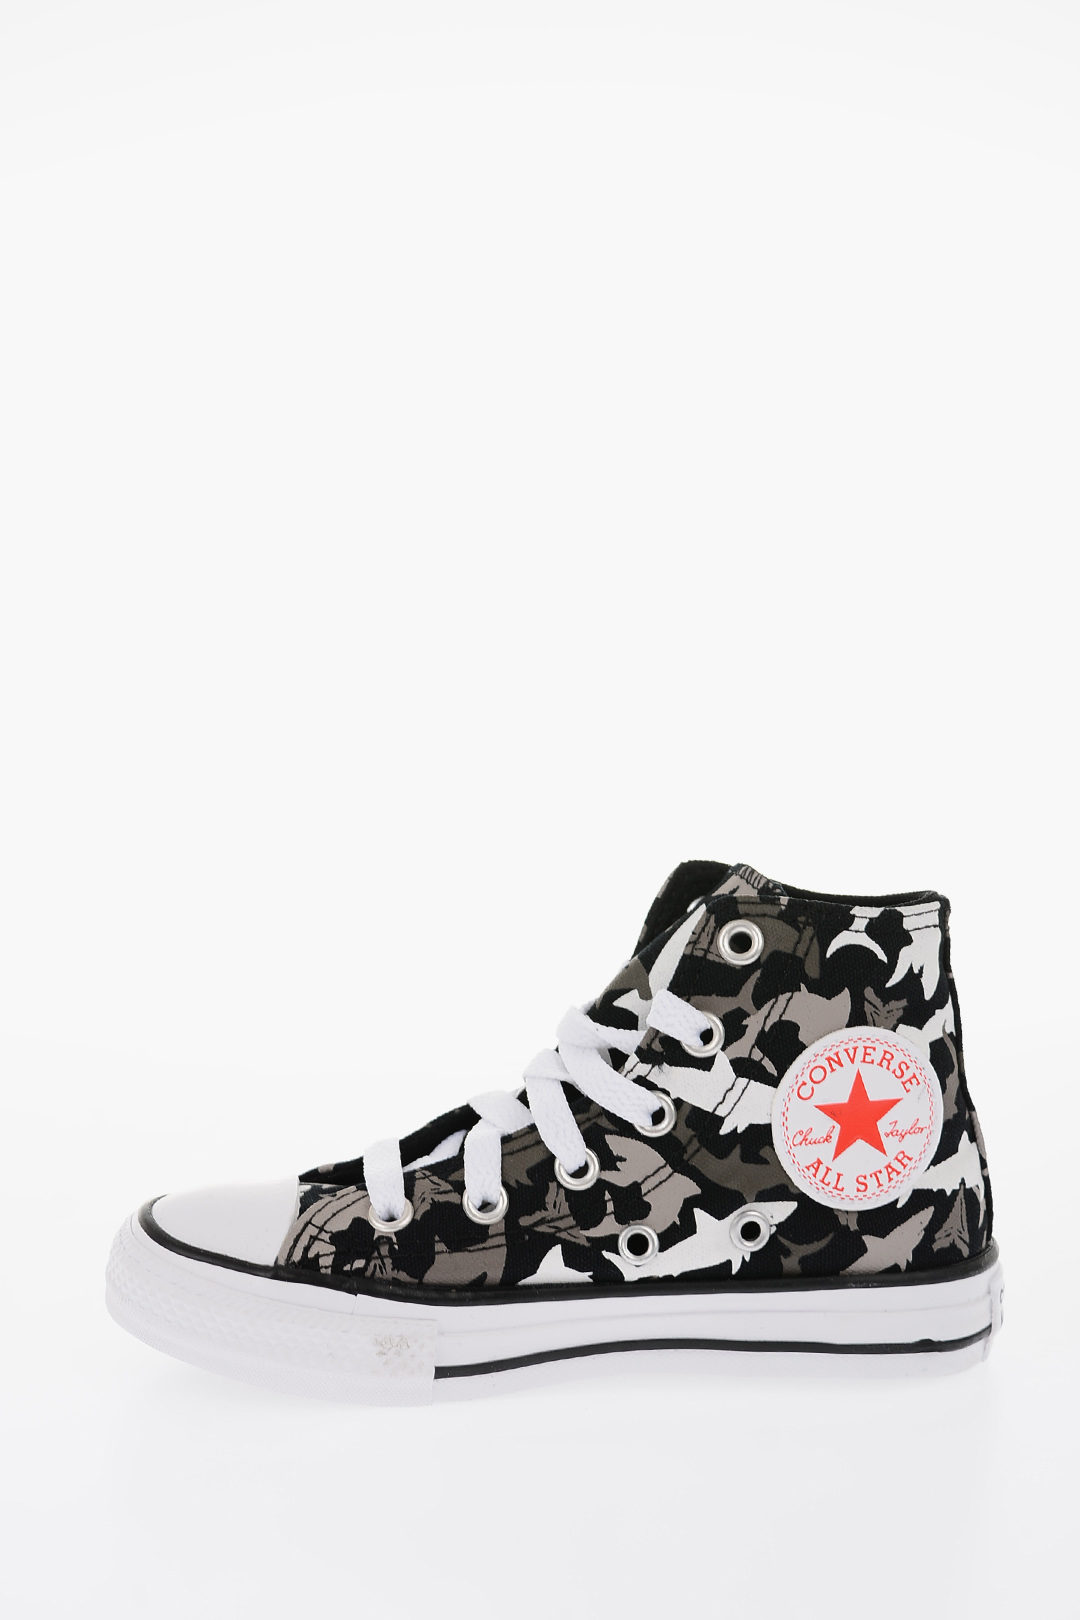 Converse KIDS ALL STAR Fabric Printed High-Top Sneakers boys - Glamood  Outlet